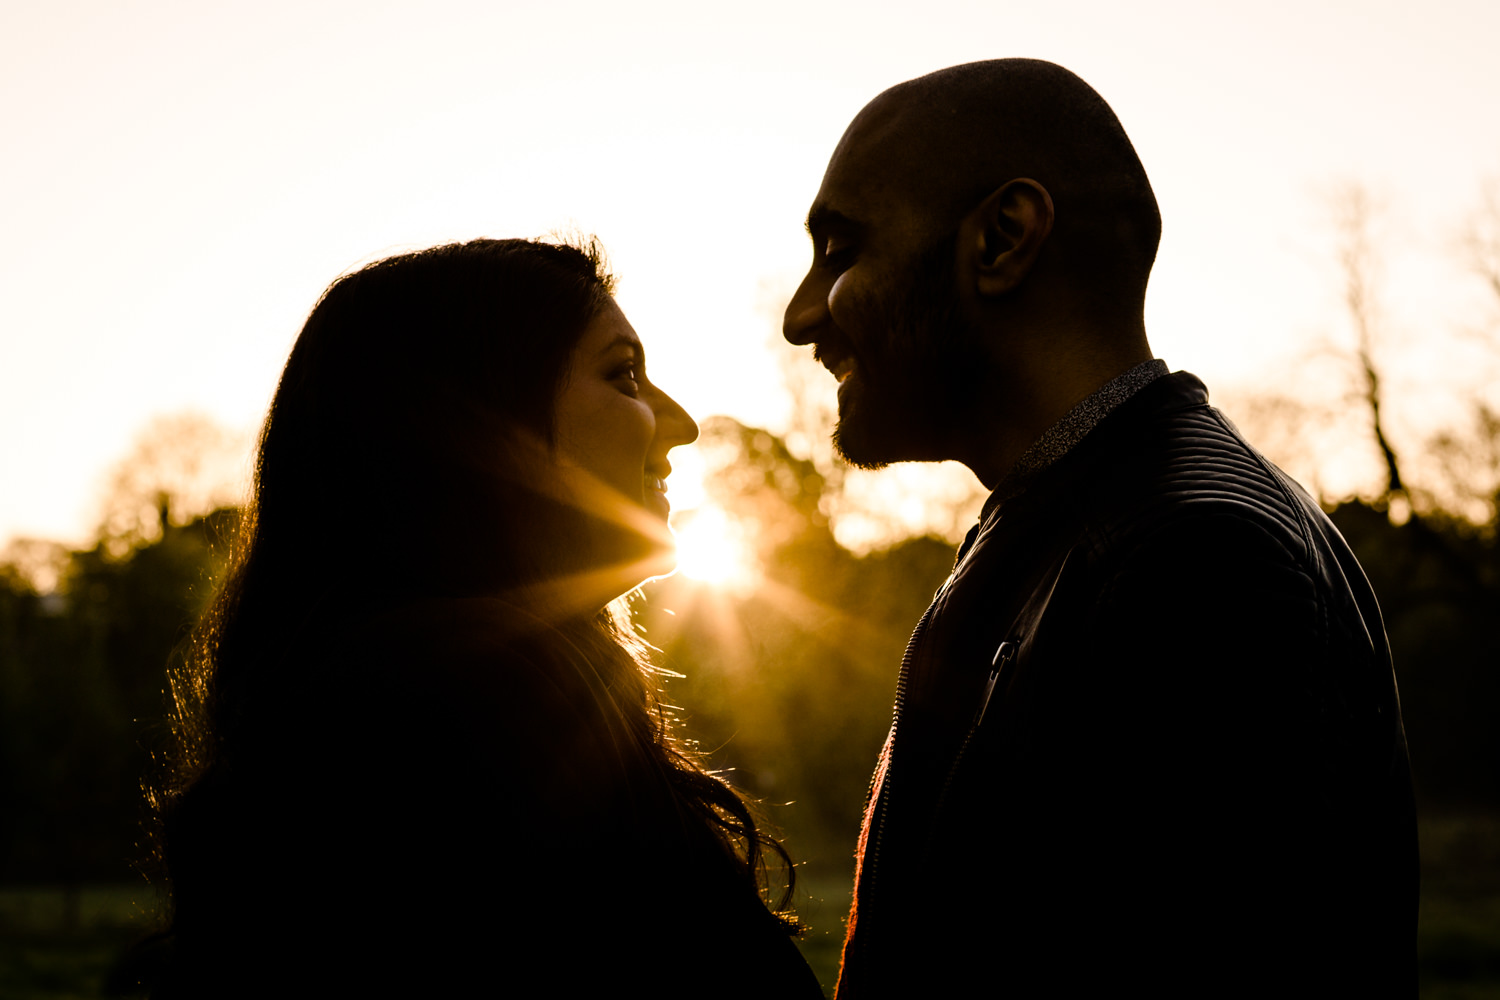 Star burst of sun light at sunrise in between a silhouette of a smiling couple, in Fetcher Moss Park, Manchester.